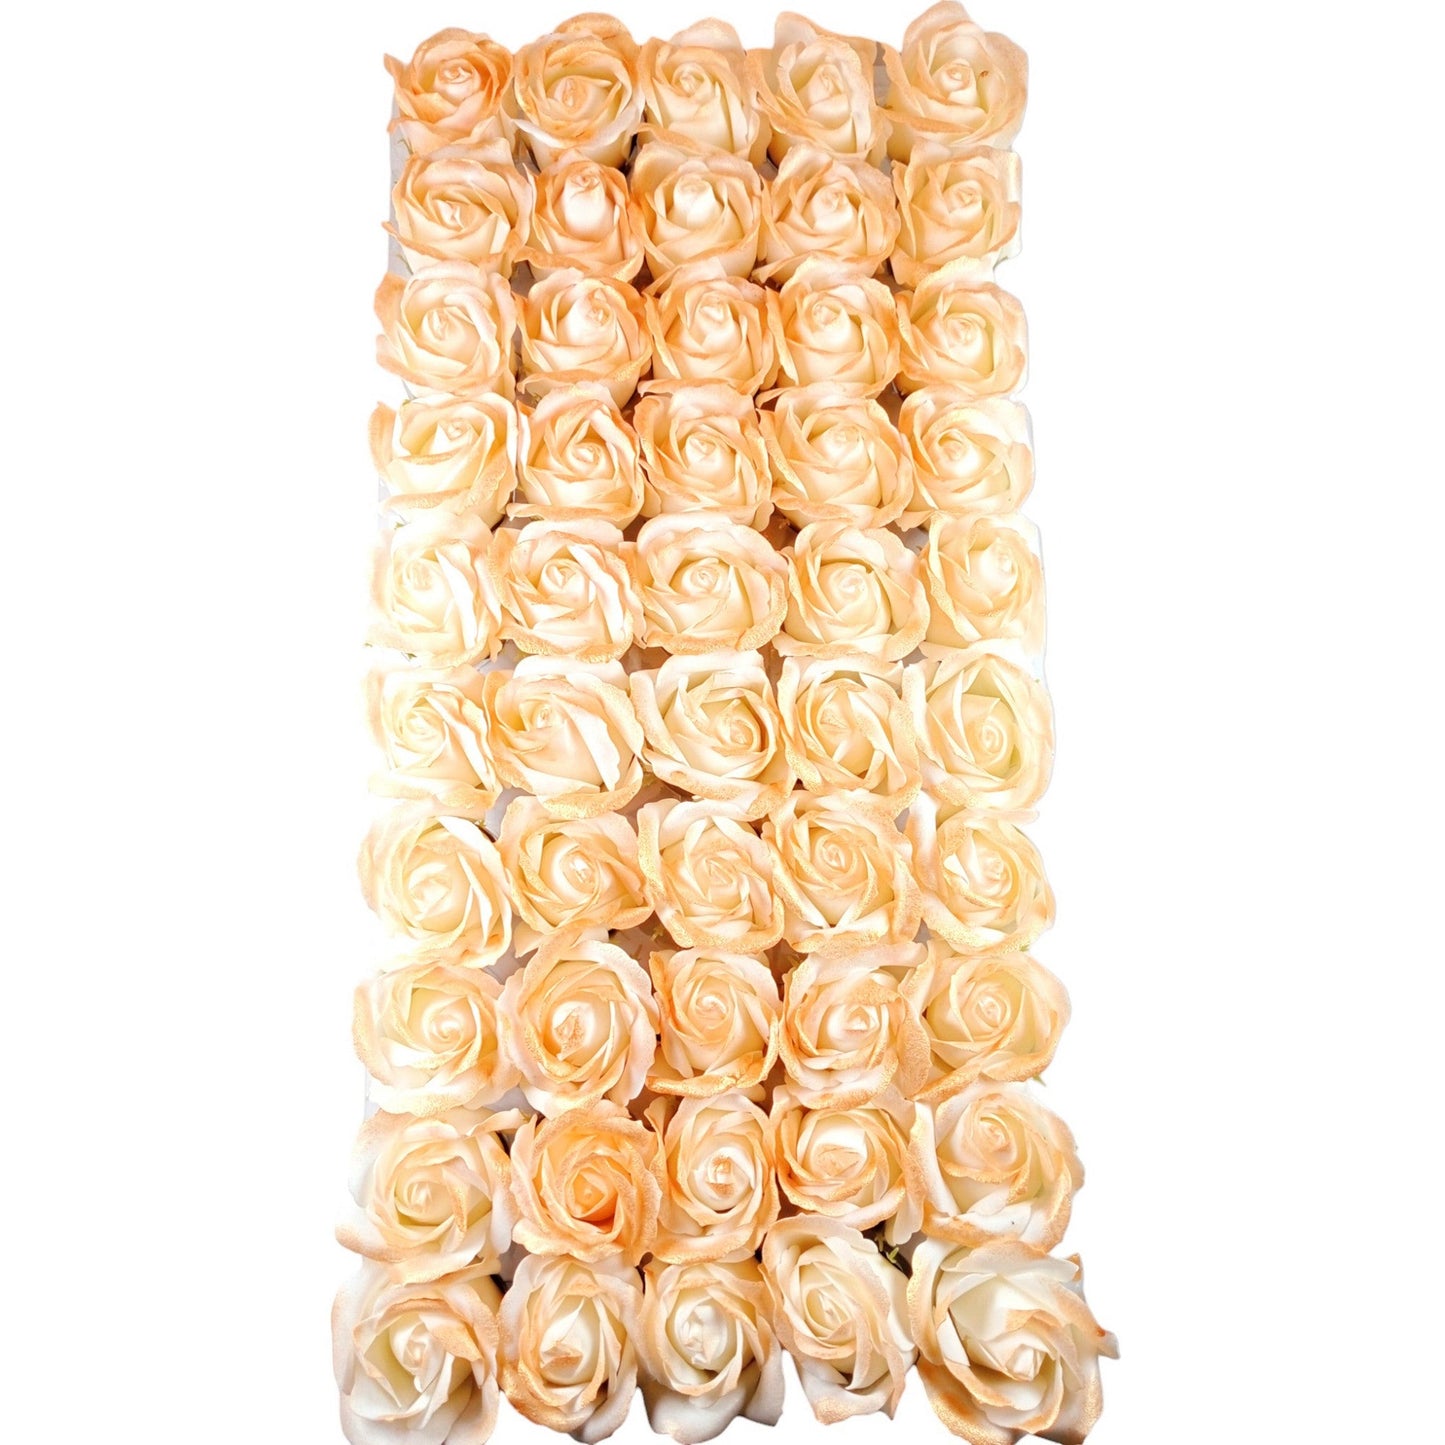 Rose Fabric Flower Head with Golden Glittery Top for Decoration, Craft or Textile - Design 143